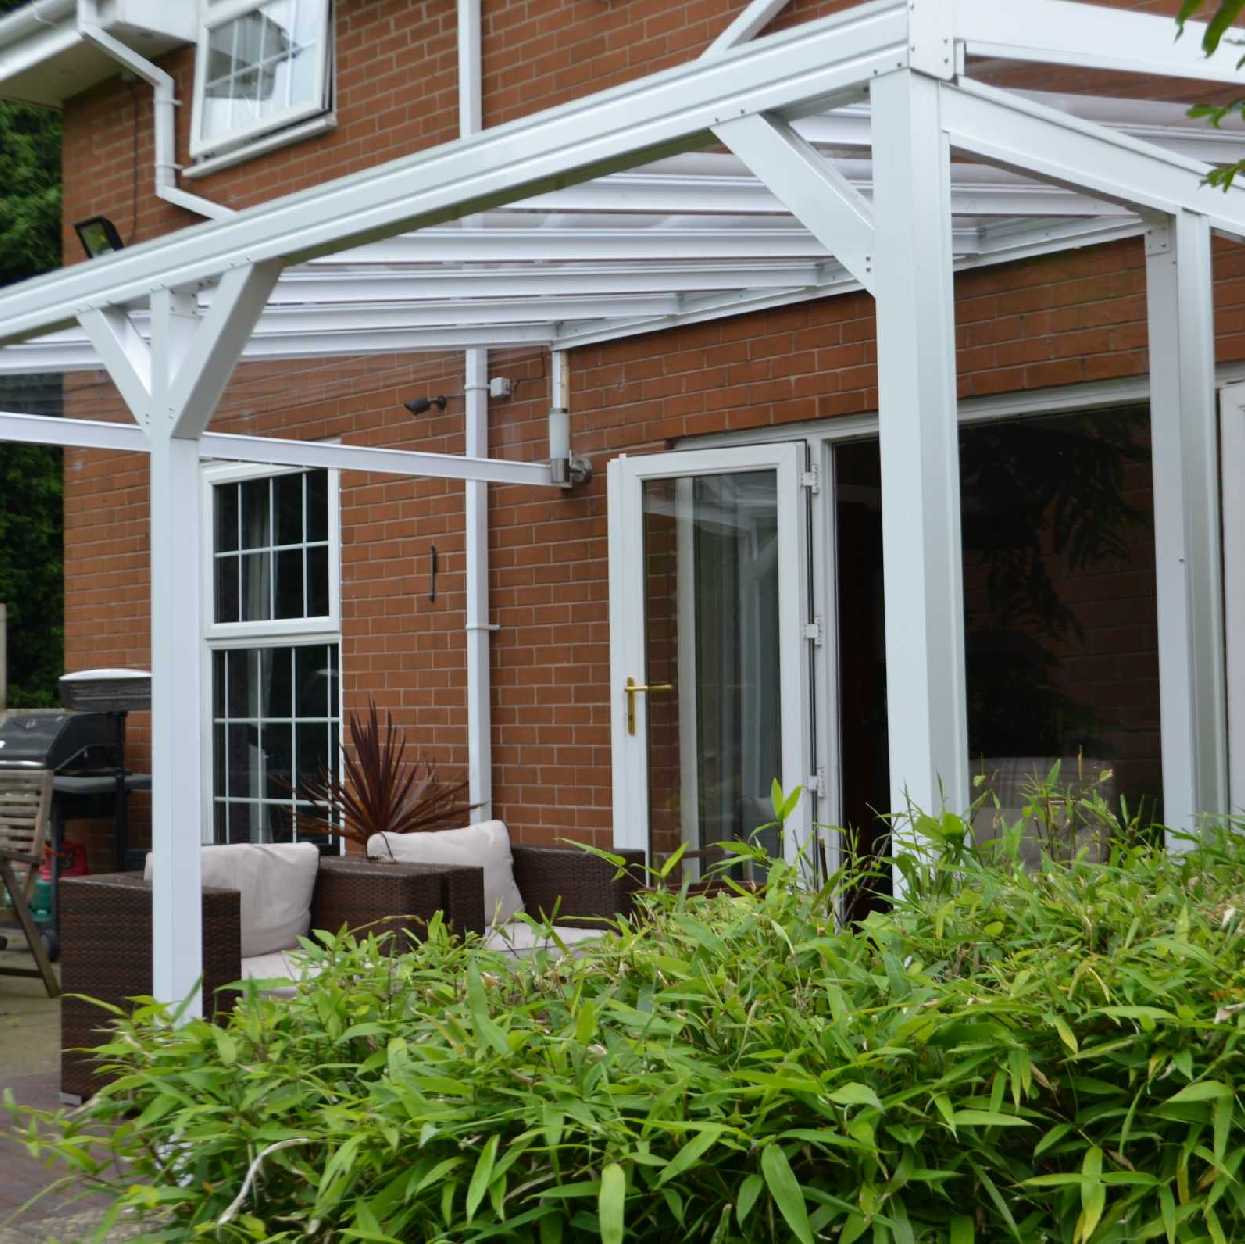 Omega Smart Lean-To Canopy, White with 6mm Glass Clear Plate Polycarbonate Glazing - 3.5m (W) x 2.5m (P), (3) Supporting Posts from Omega Build